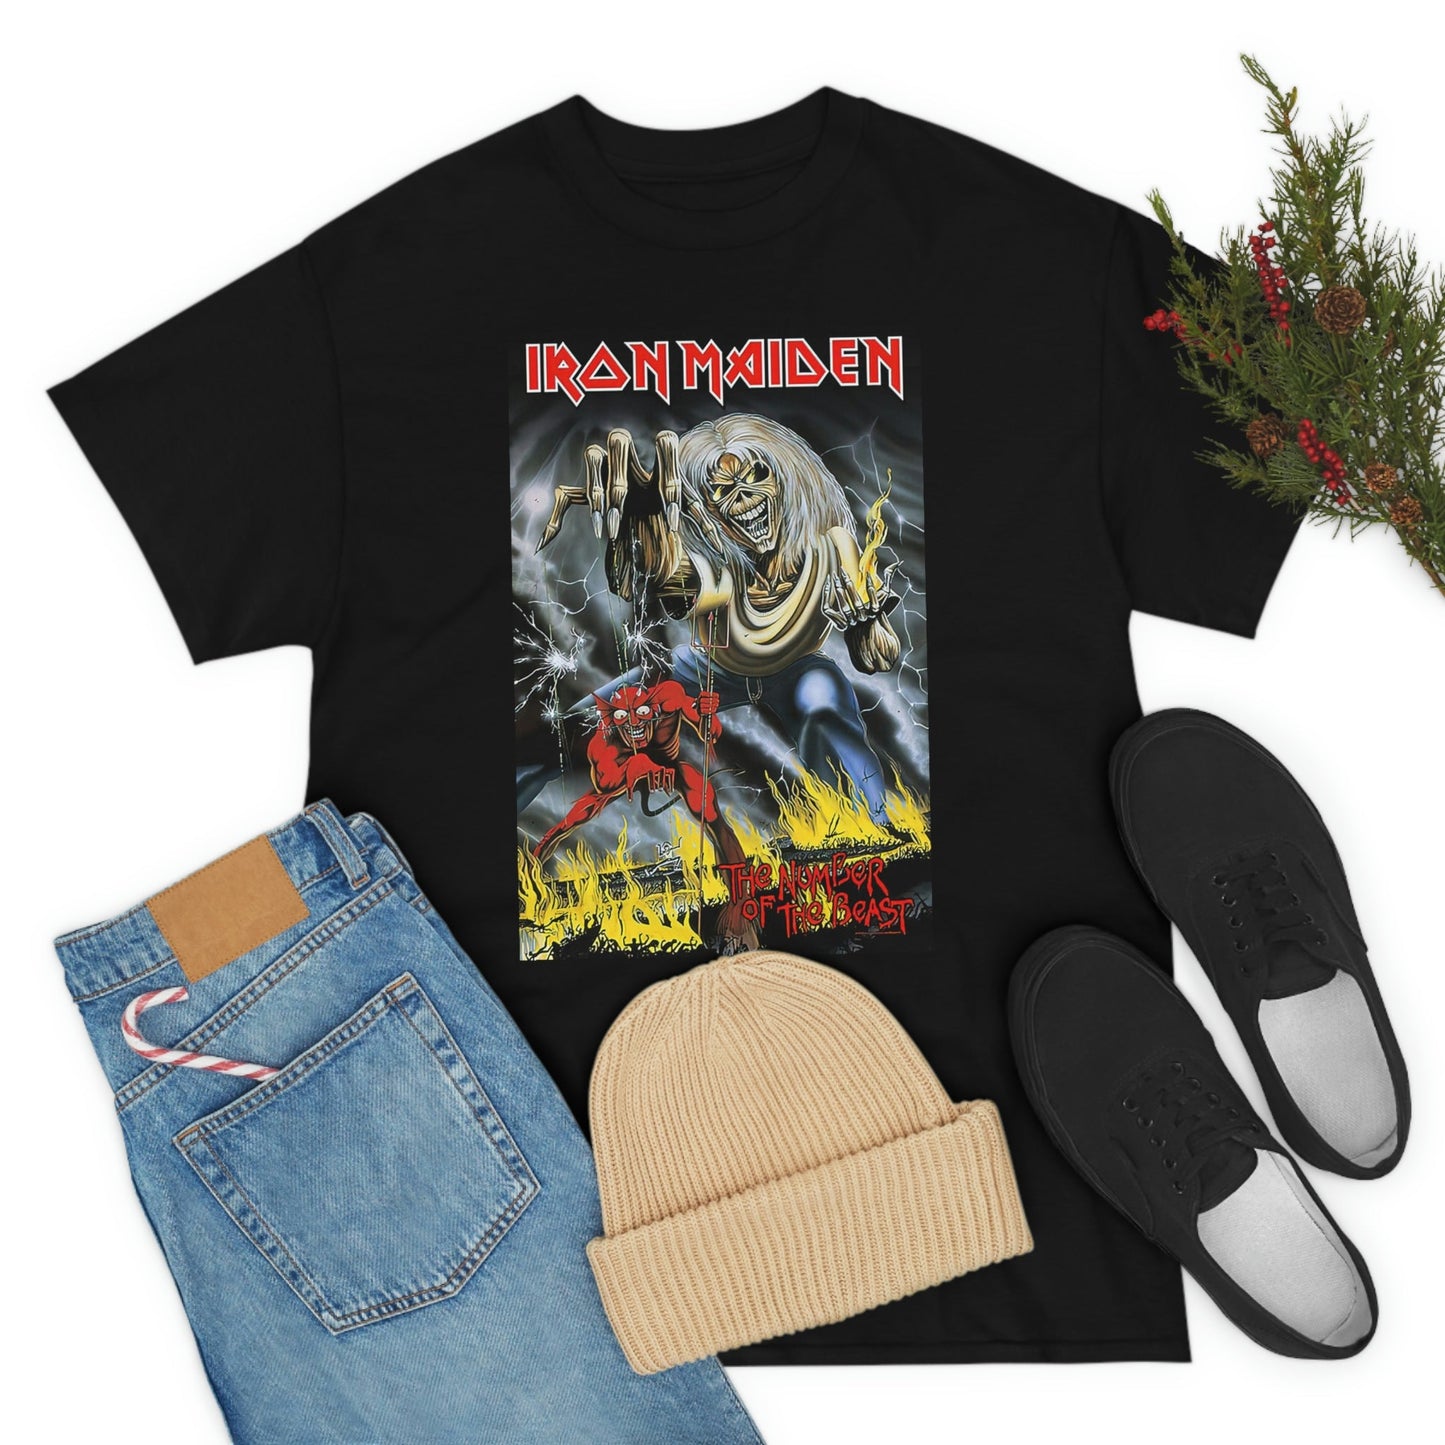 IRON MAIDEN Number Of The Beast T-shirt - RetroTeeShop